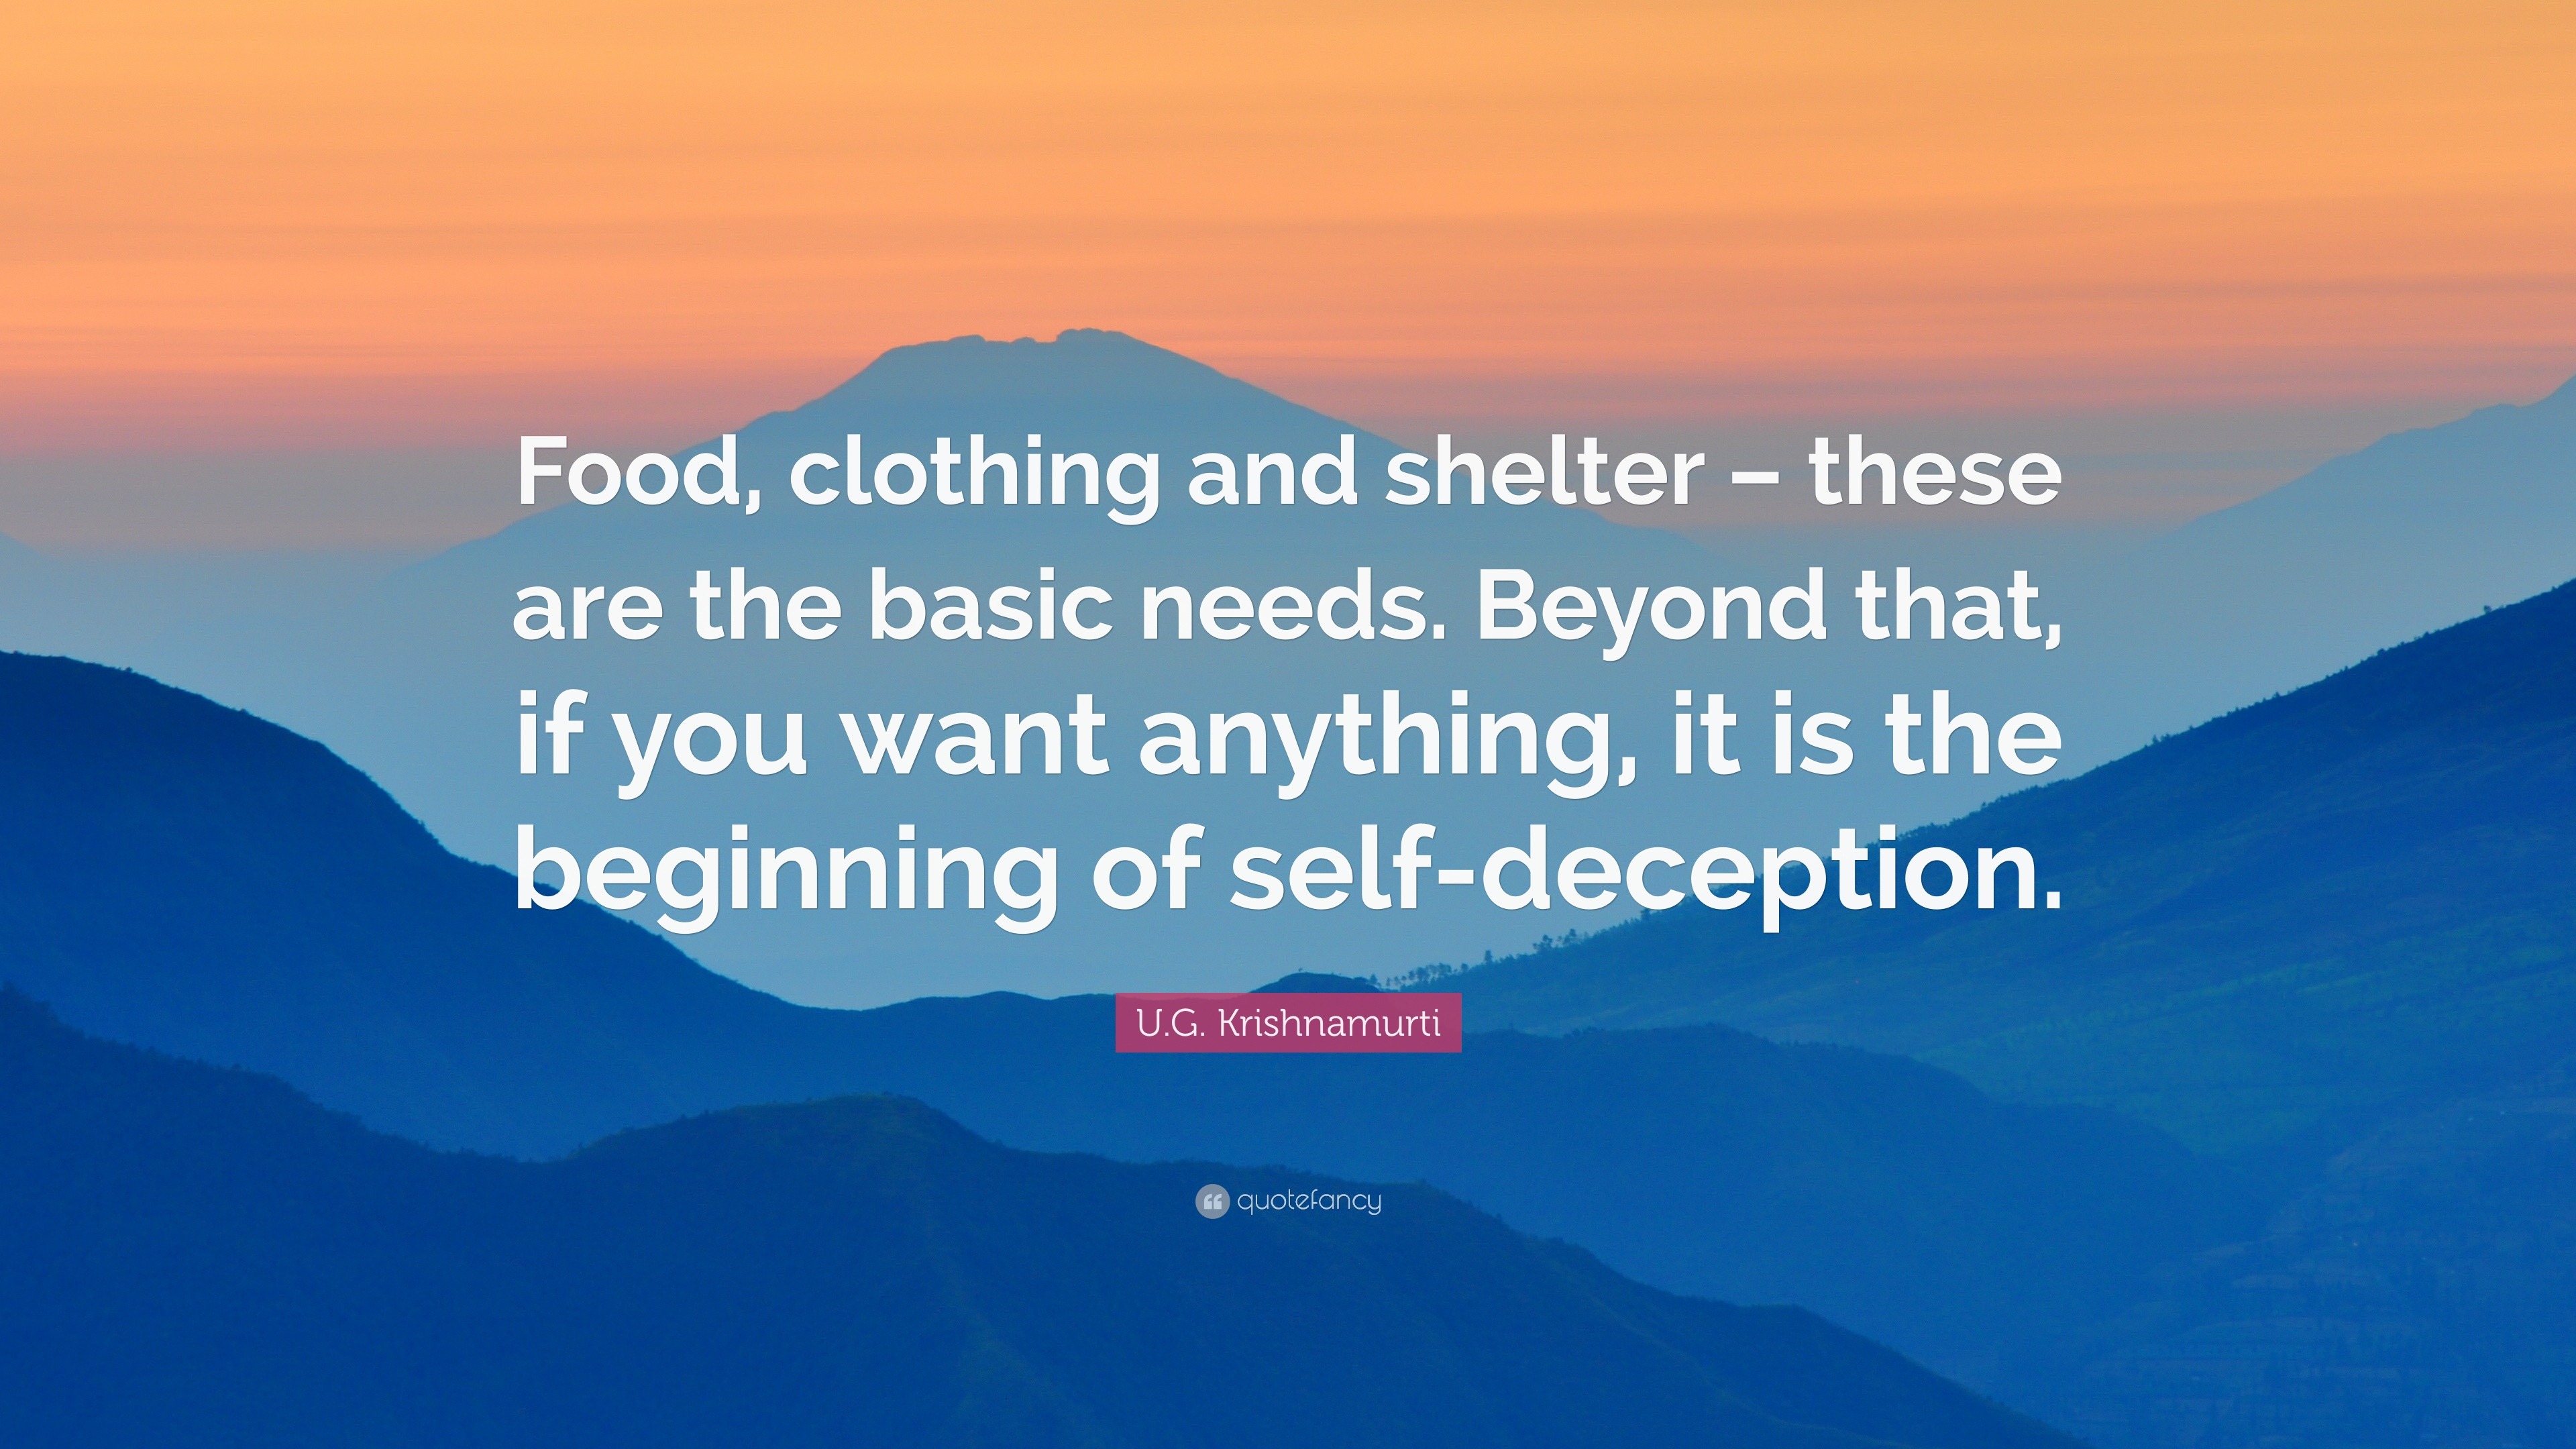 https://quotefancy.com/media/wallpaper/3840x2160/432914-U-G-Krishnamurti-Quote-Food-clothing-and-shelter-these-are-the.jpg